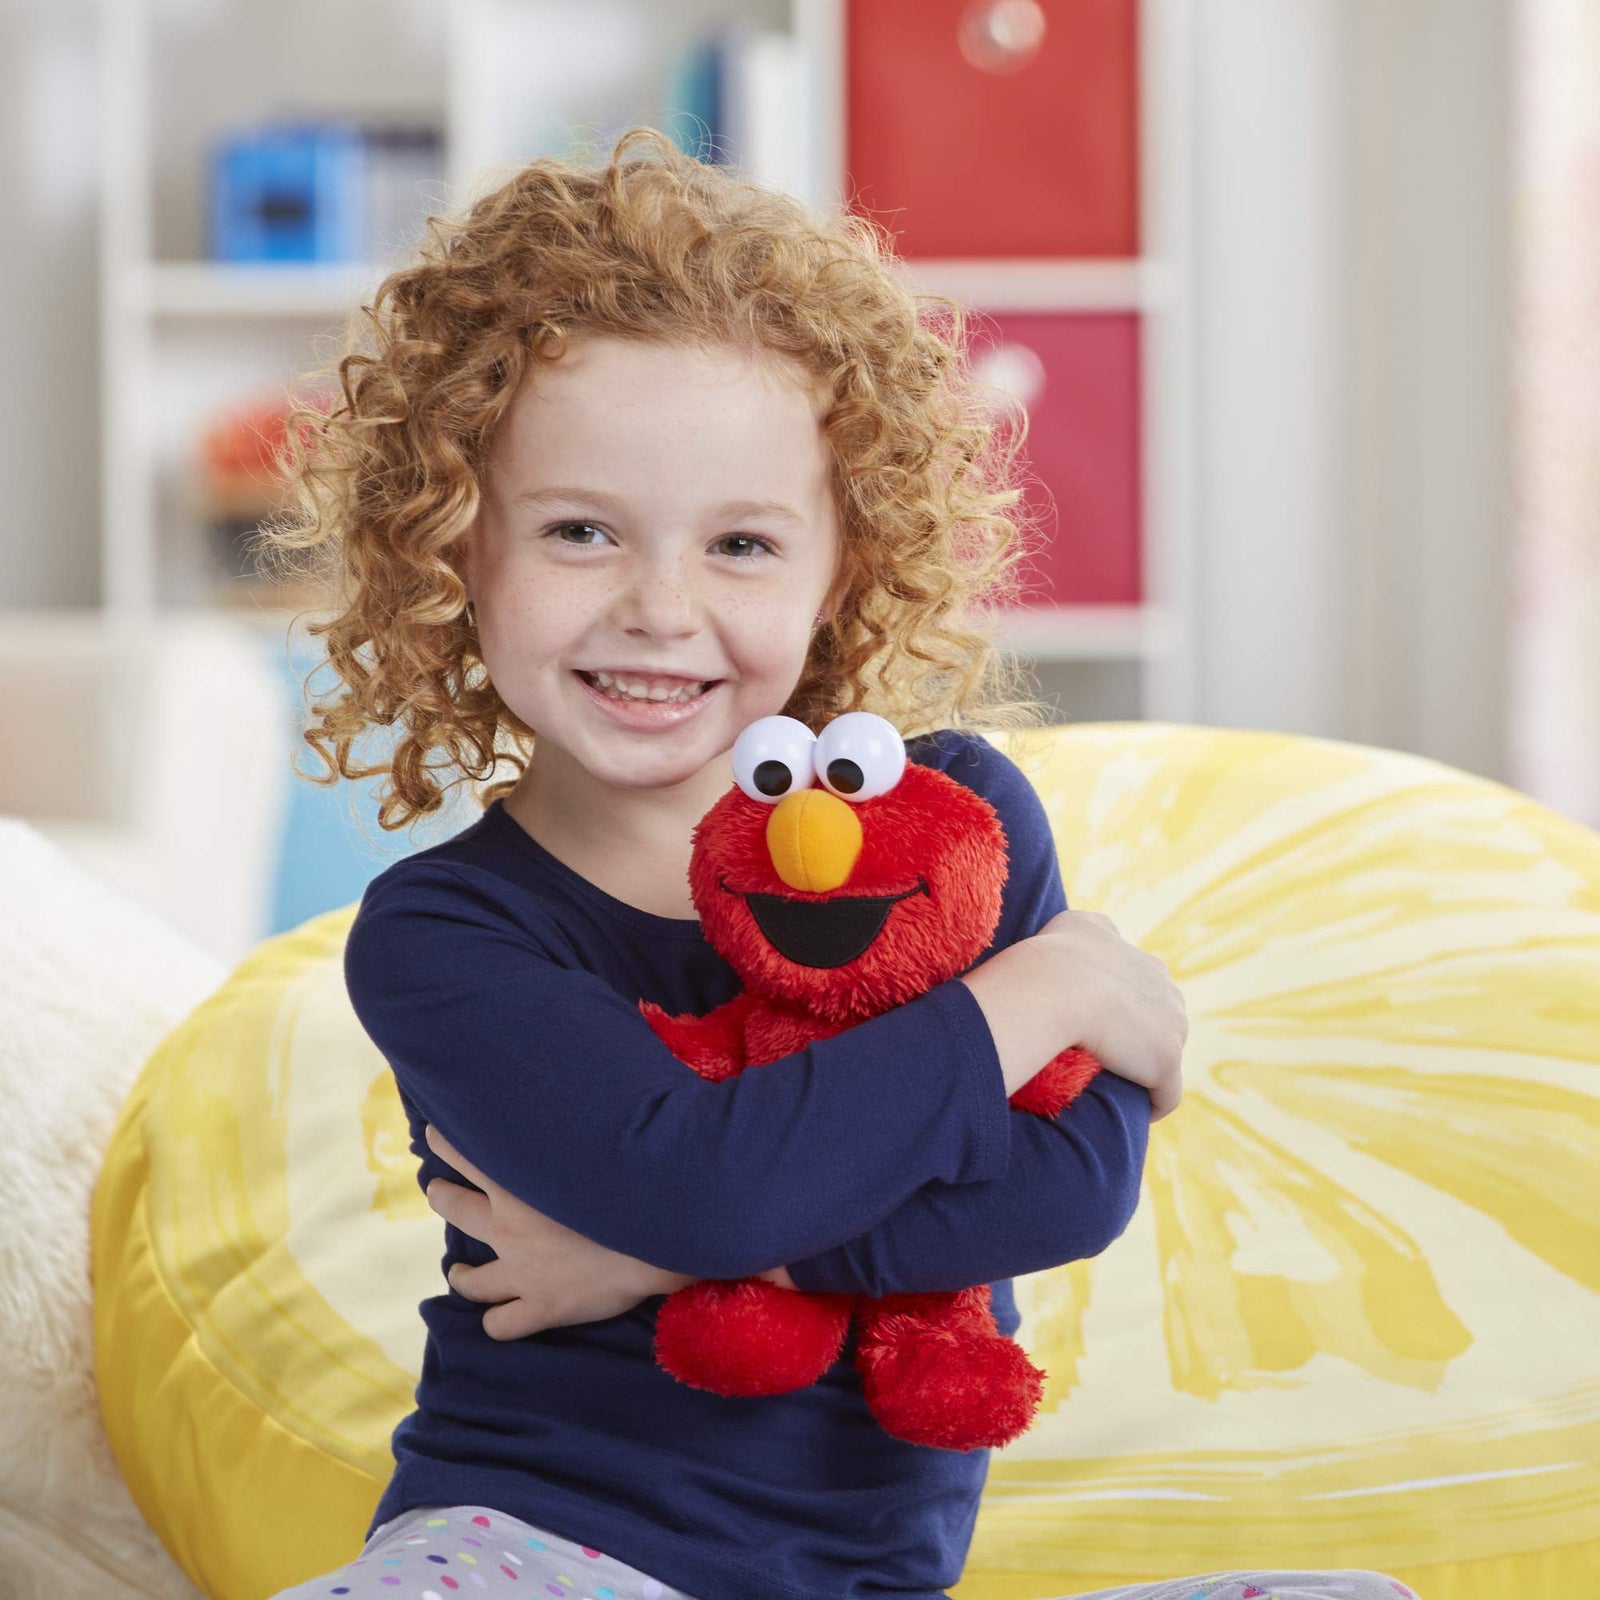 Sesame Street Little Laughs Tickle Me Elmo, Talking, Laughing 10-Inch Plush Toy for Toddlers, Kids 12 Months & Up